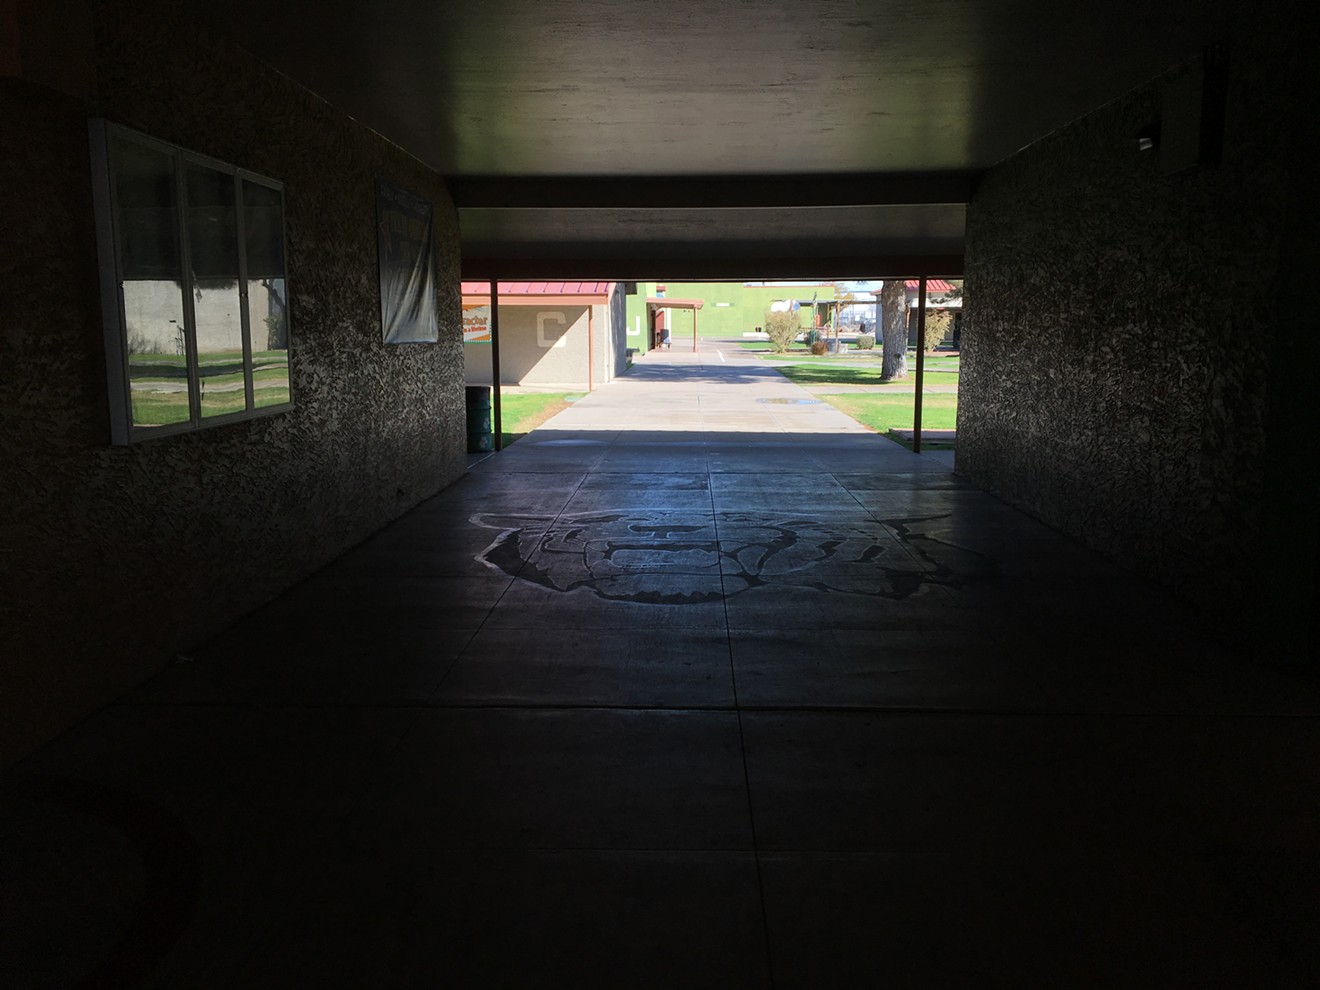 The entrance to Alfred F. Garcia Elementary School. Arizona lawmakers may ease the requirement that English language learners spend four hours a day separated from their peers.